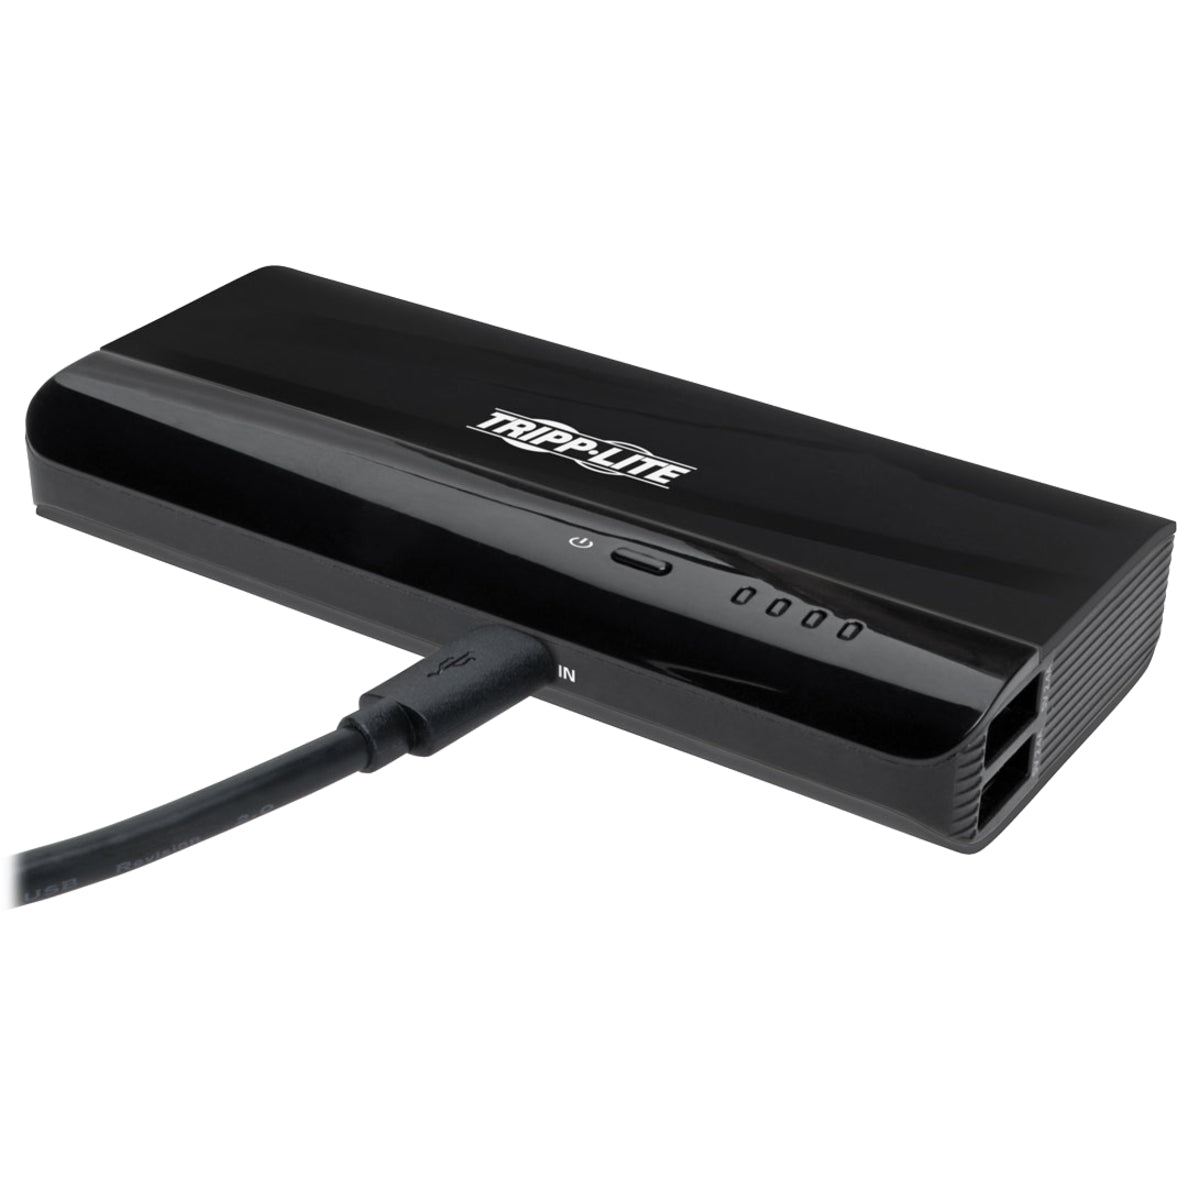 Tripp Lite UPB-12K0-S2X2U 12,000mAh Dual-Port Mobile Power Bank USB Battery Charger, Portable and Reliable Charging for Your Devices